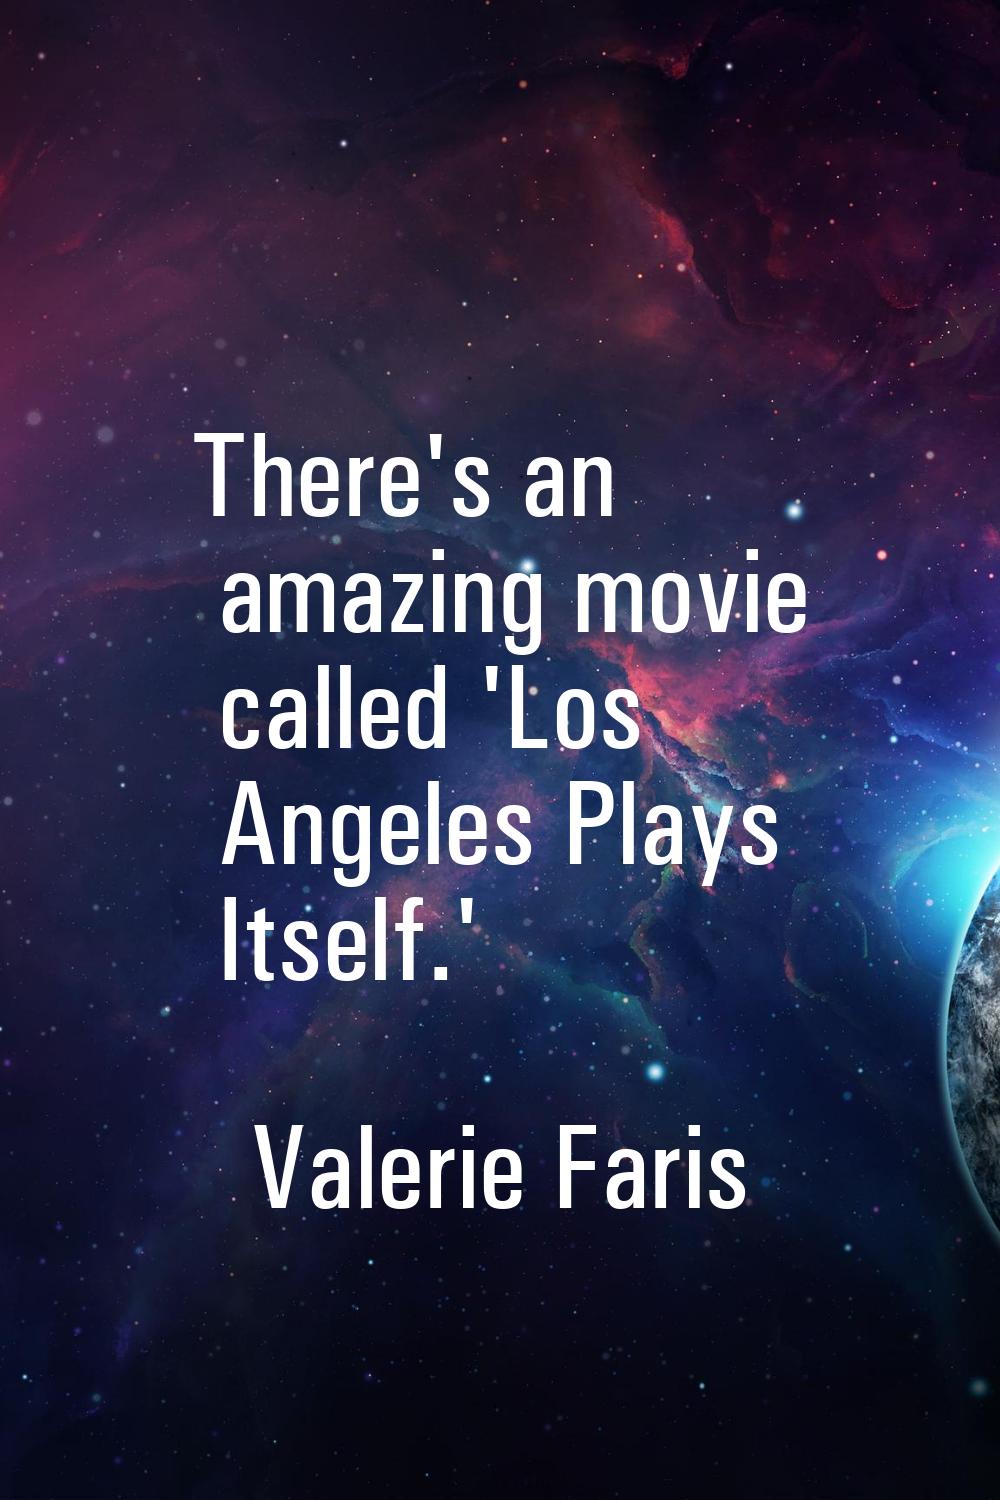 There's an amazing movie called 'Los Angeles Plays Itself.'